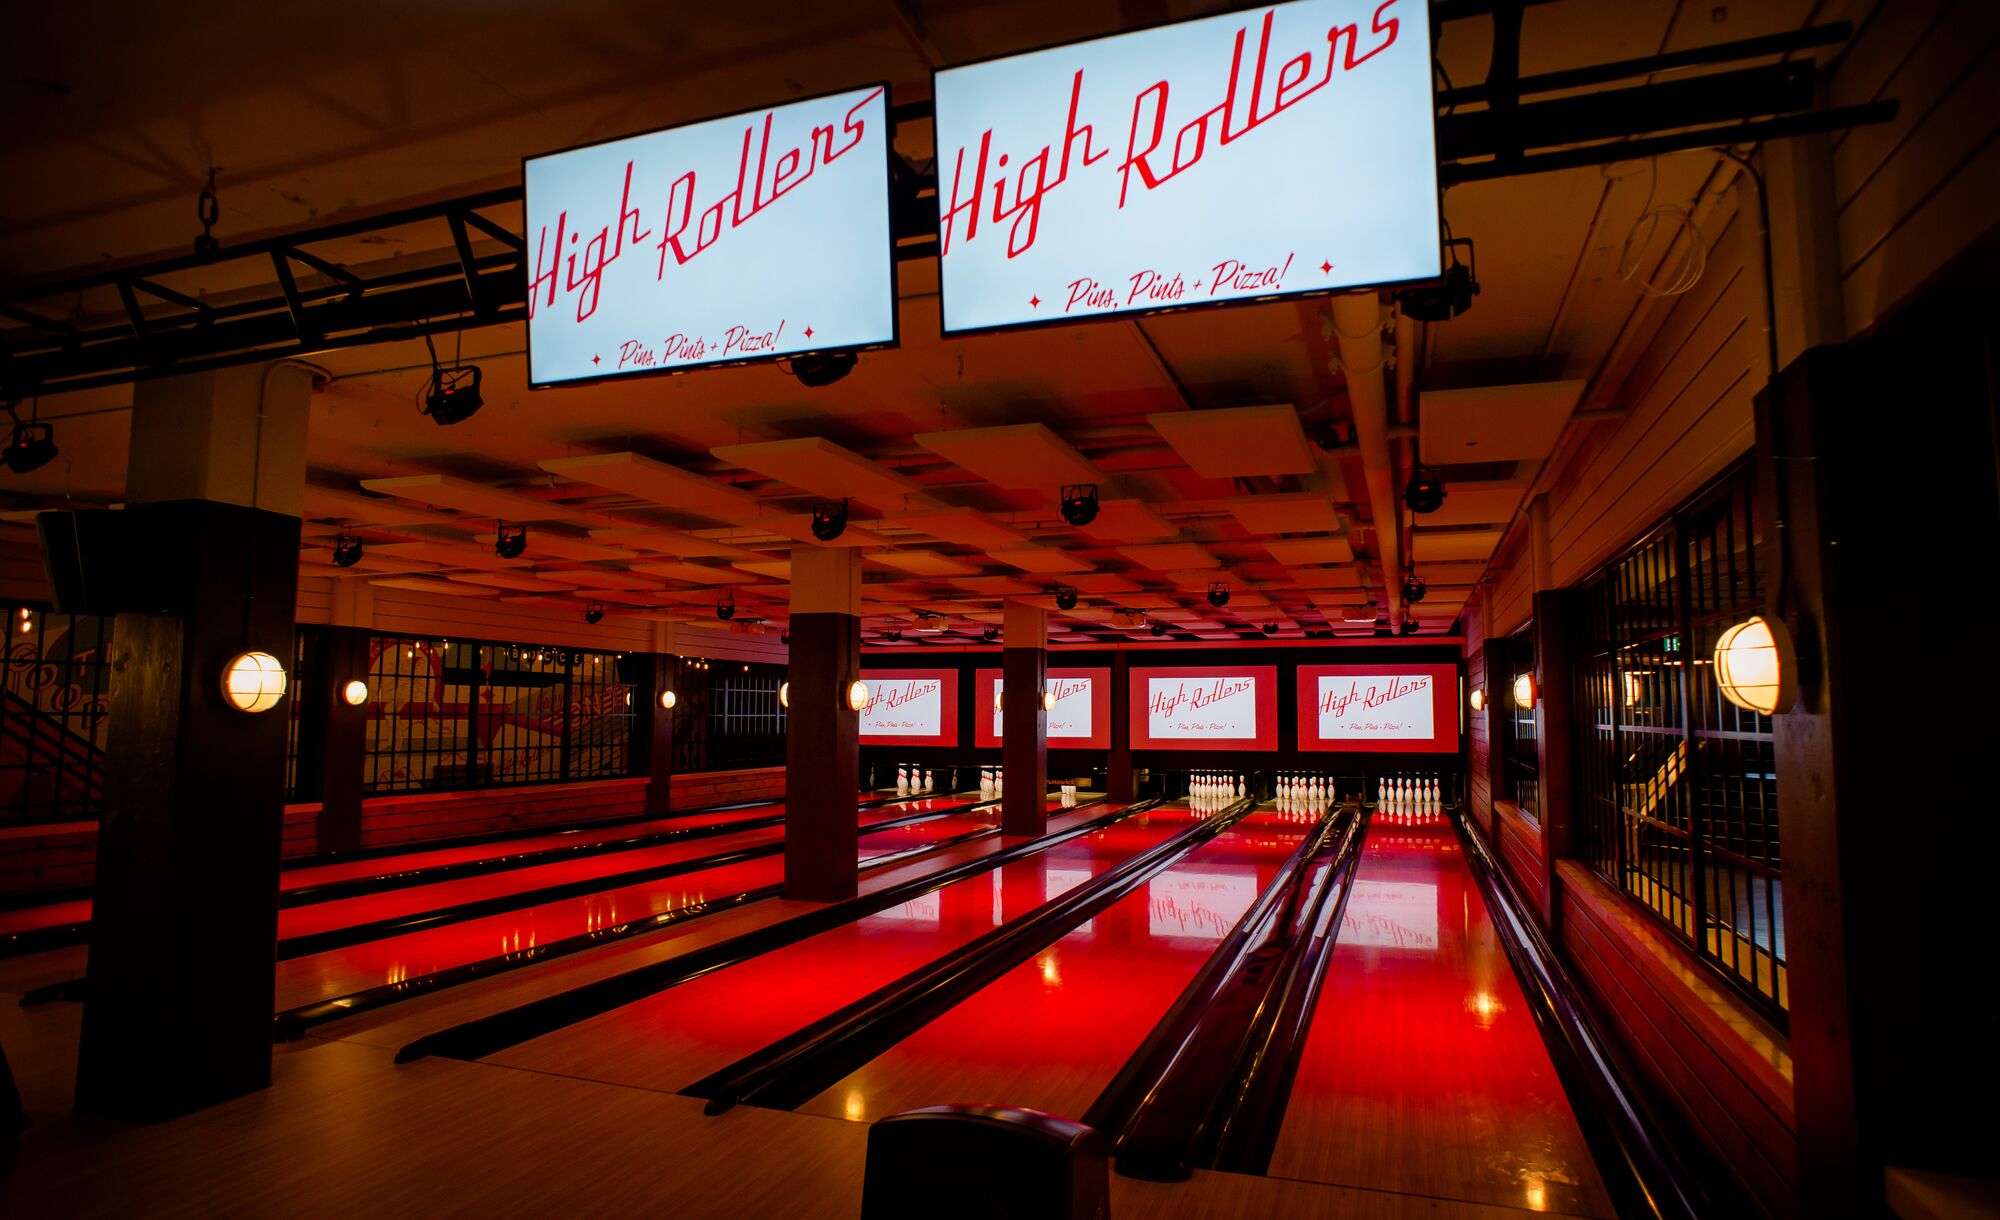 High Rollers bowling alley in Banff National Park.